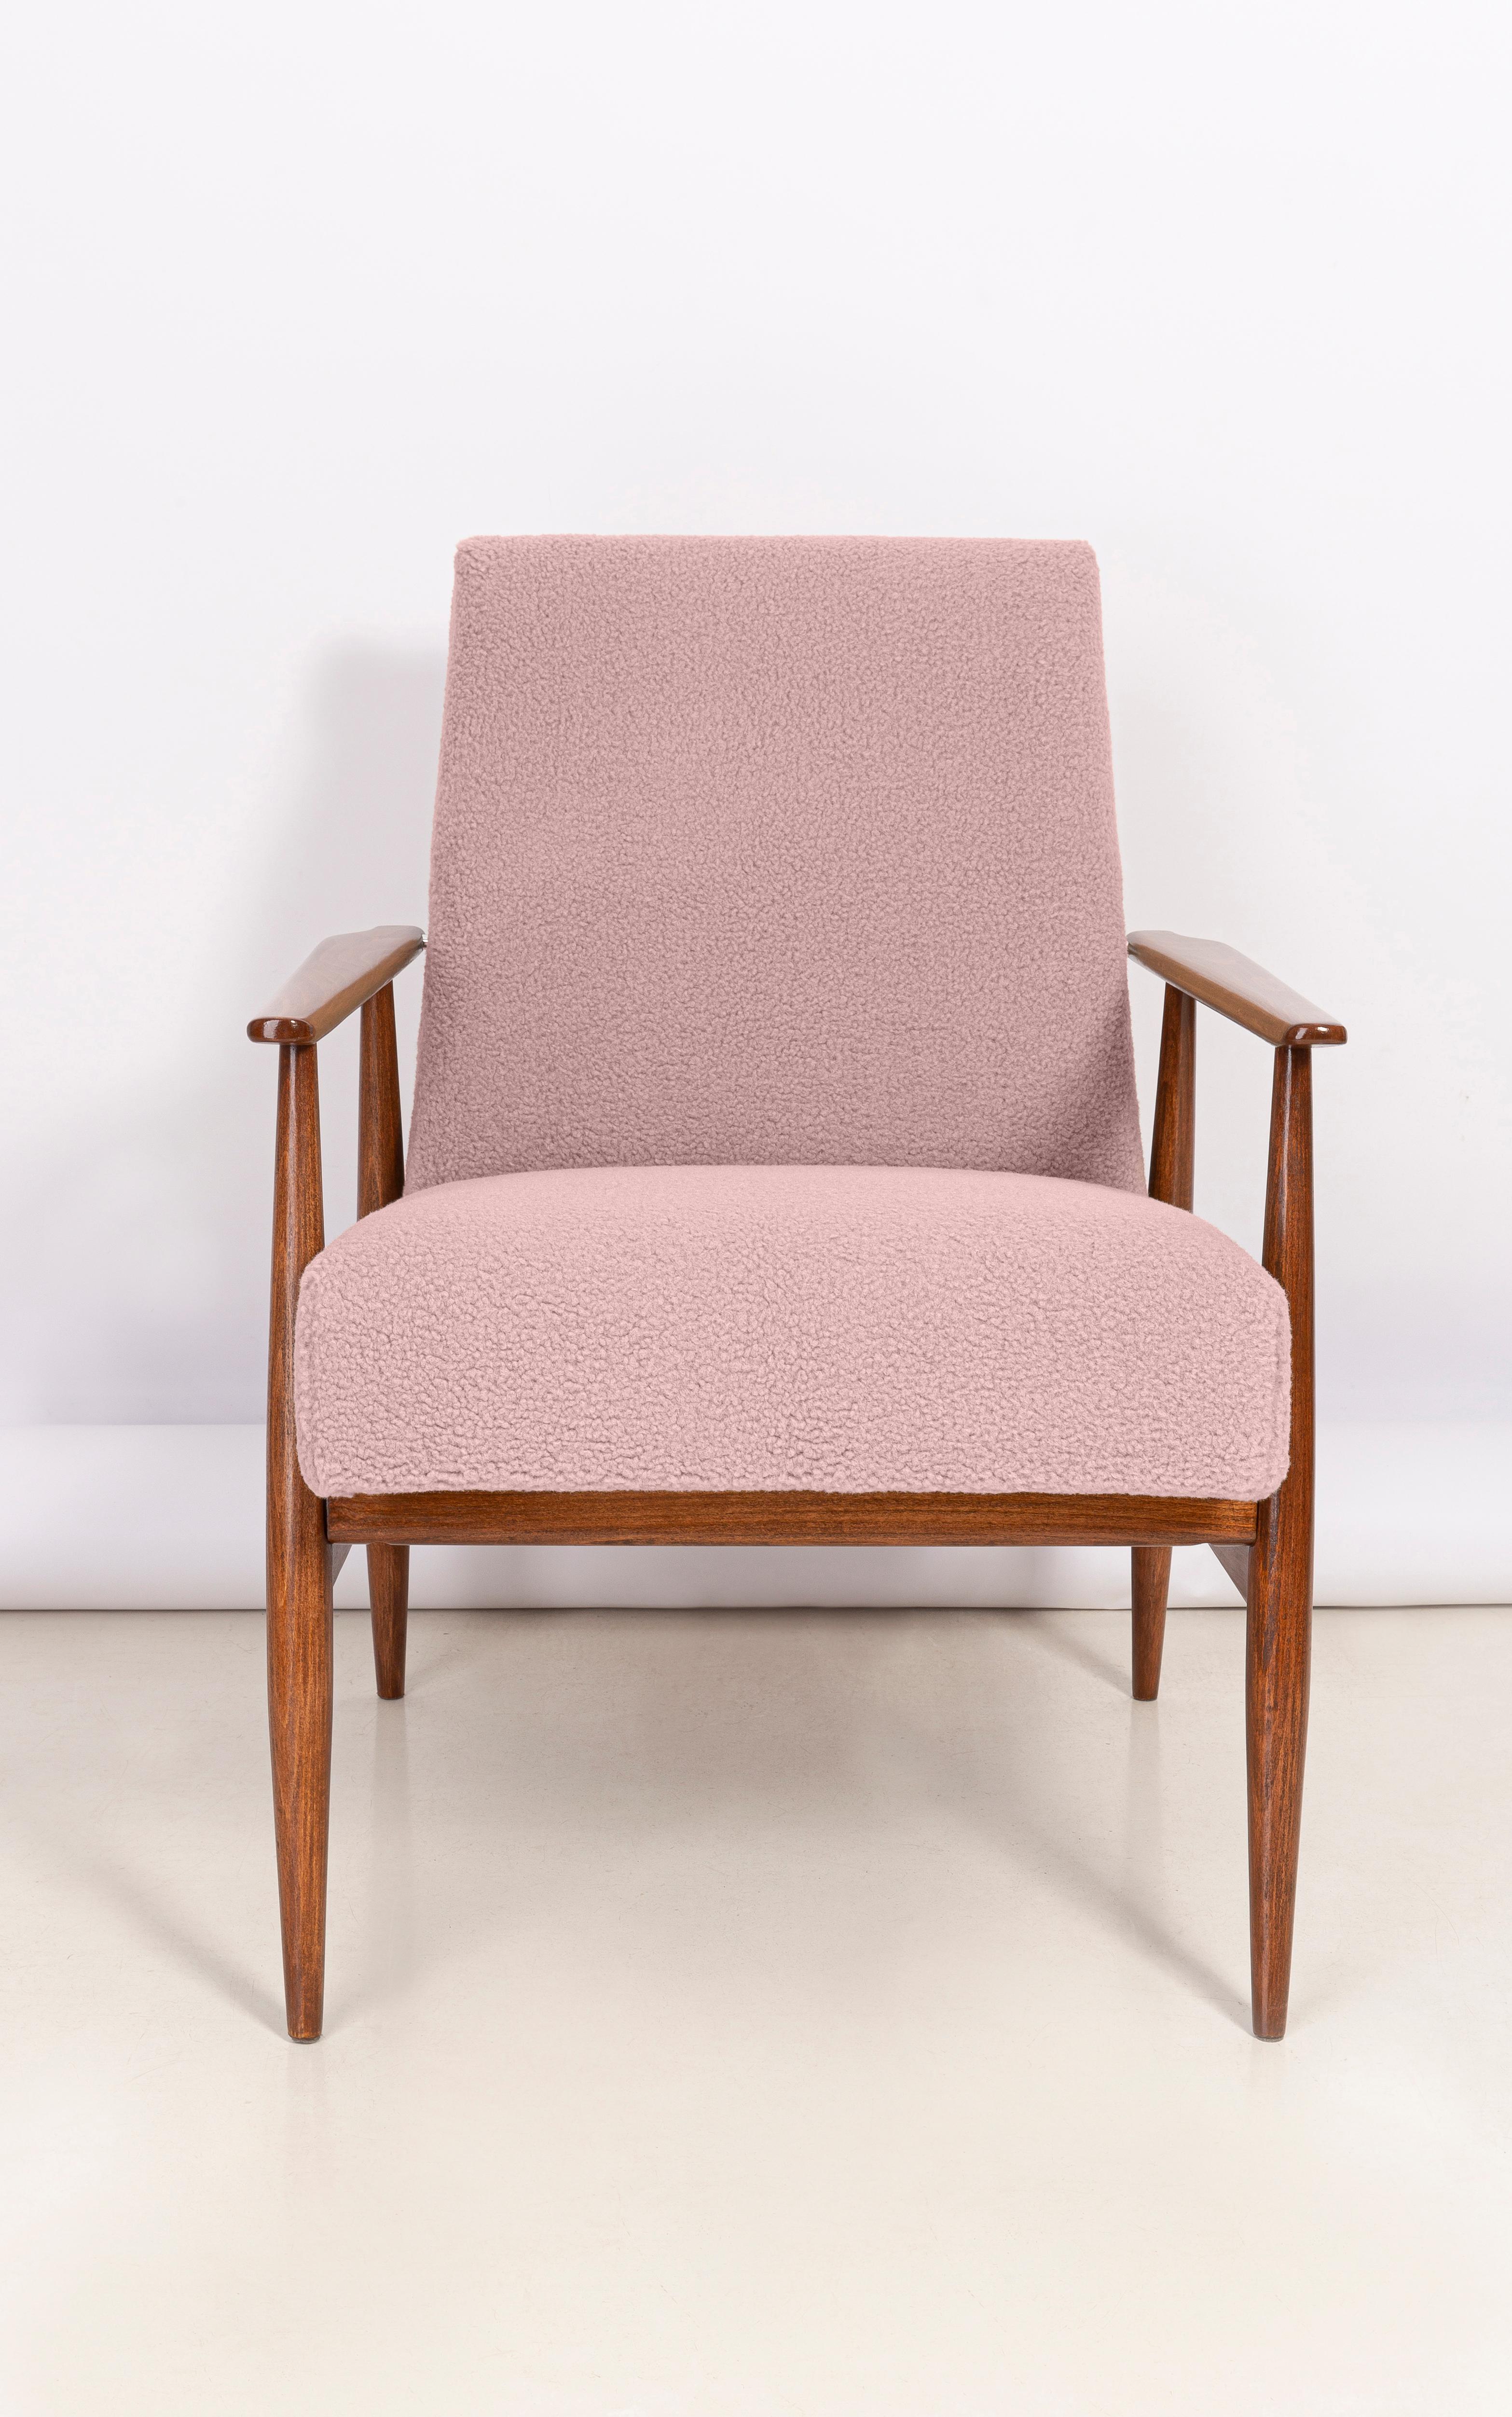 Hand-Crafted Twelve Dusty Pink Bouclé Dante Armchairs, H. Lis, Europe, 1960s For Sale